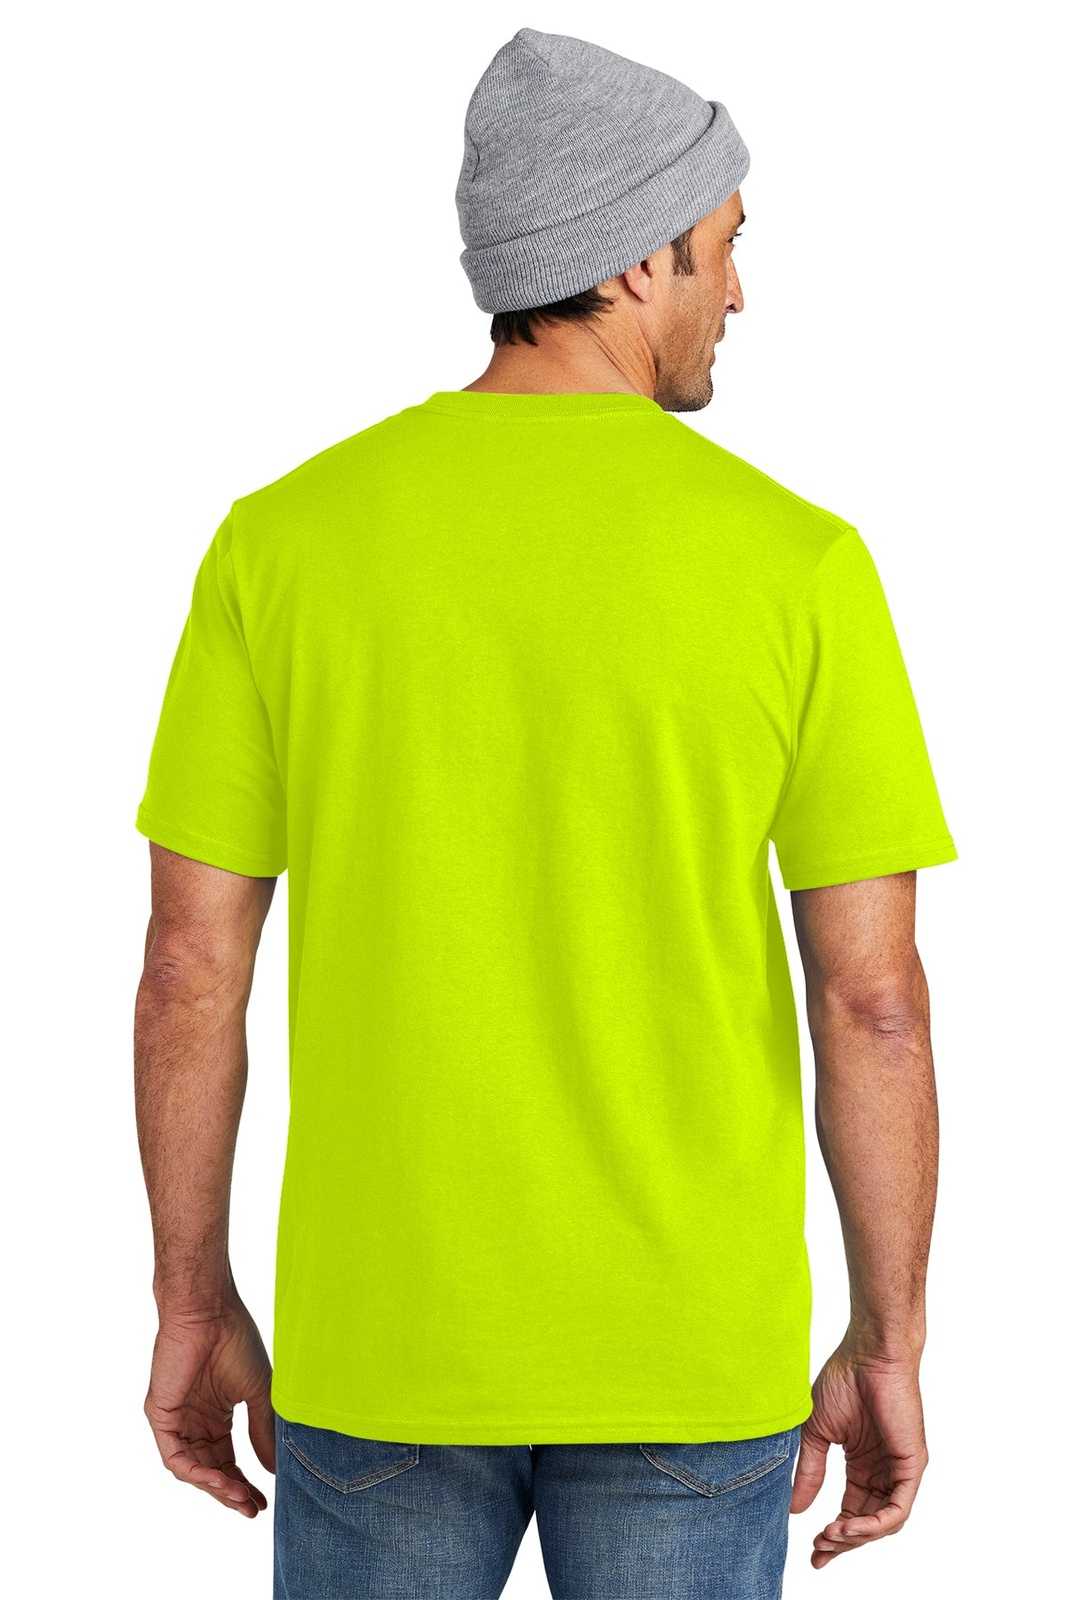 Volunteer Knitwear VL100P All-American Pocket Tee - Safety Green - HIT a Double - 2